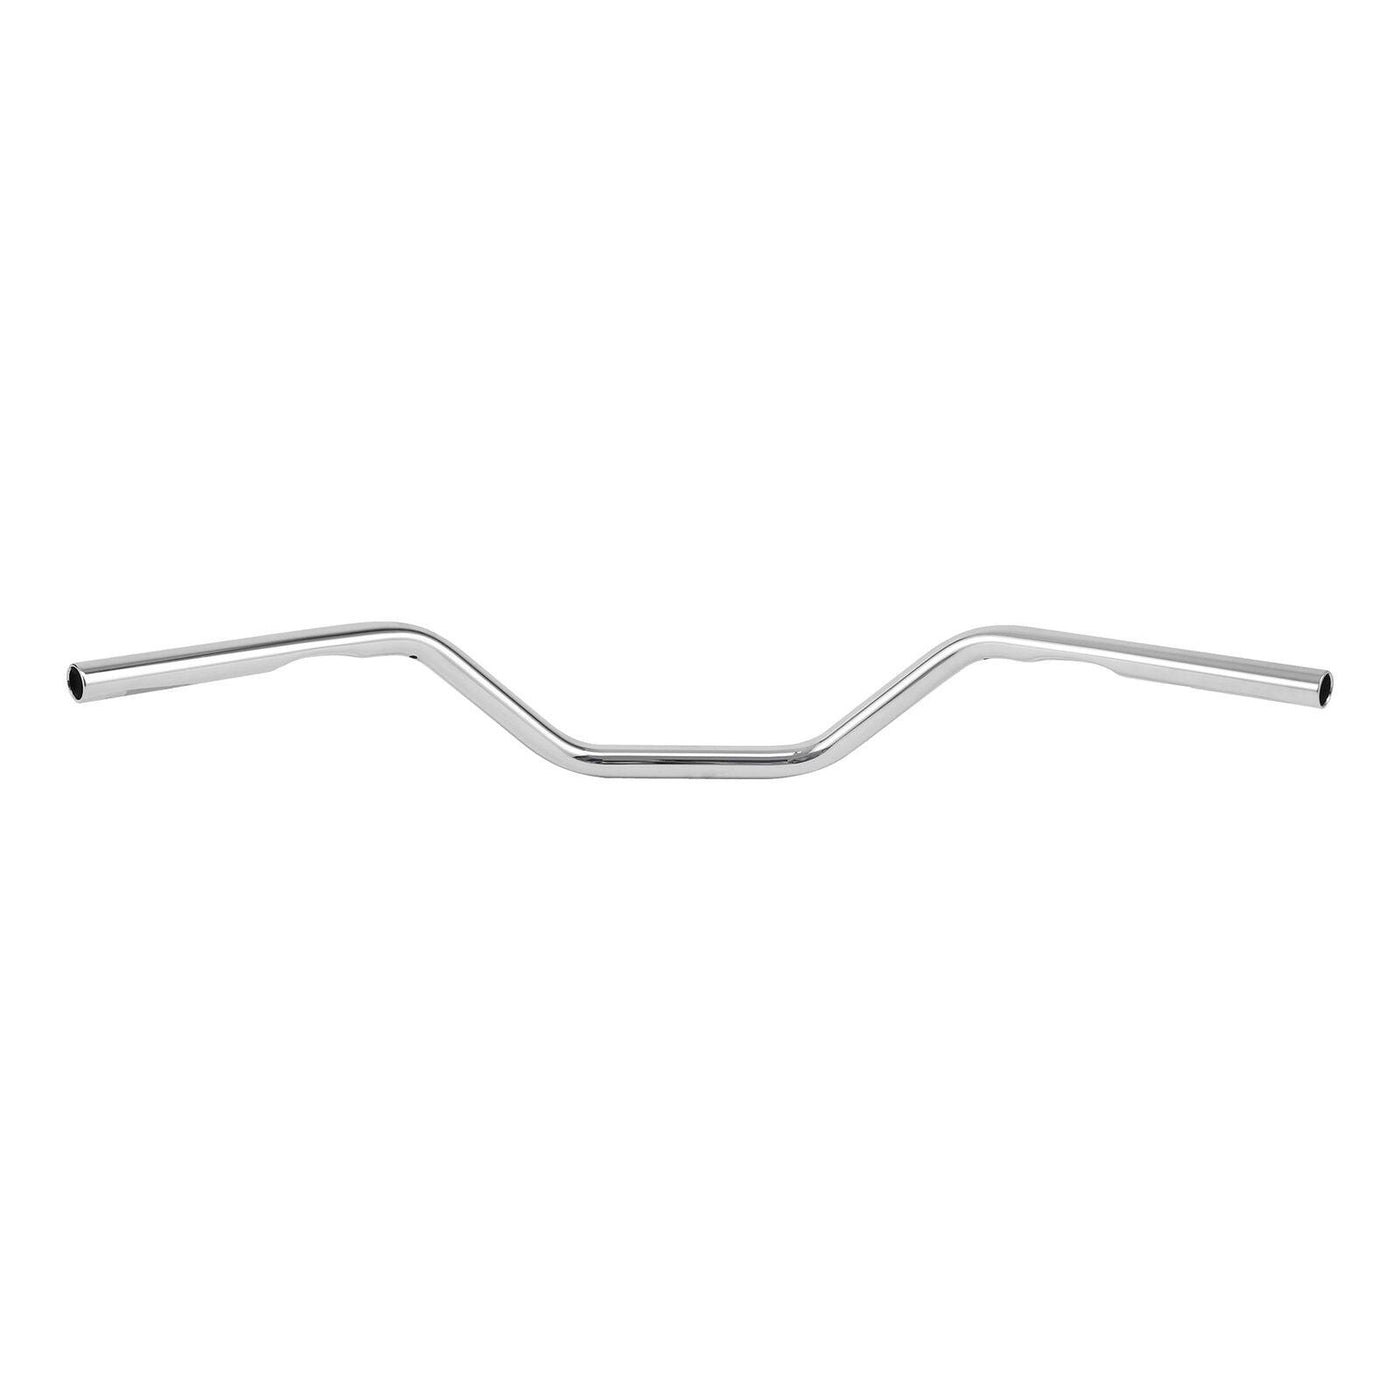 Chrome 5'' Rise 1" Ape Hanger Bar Handlebar Fit For Harley Sportster XL1200 Dyna - Moto Life Products